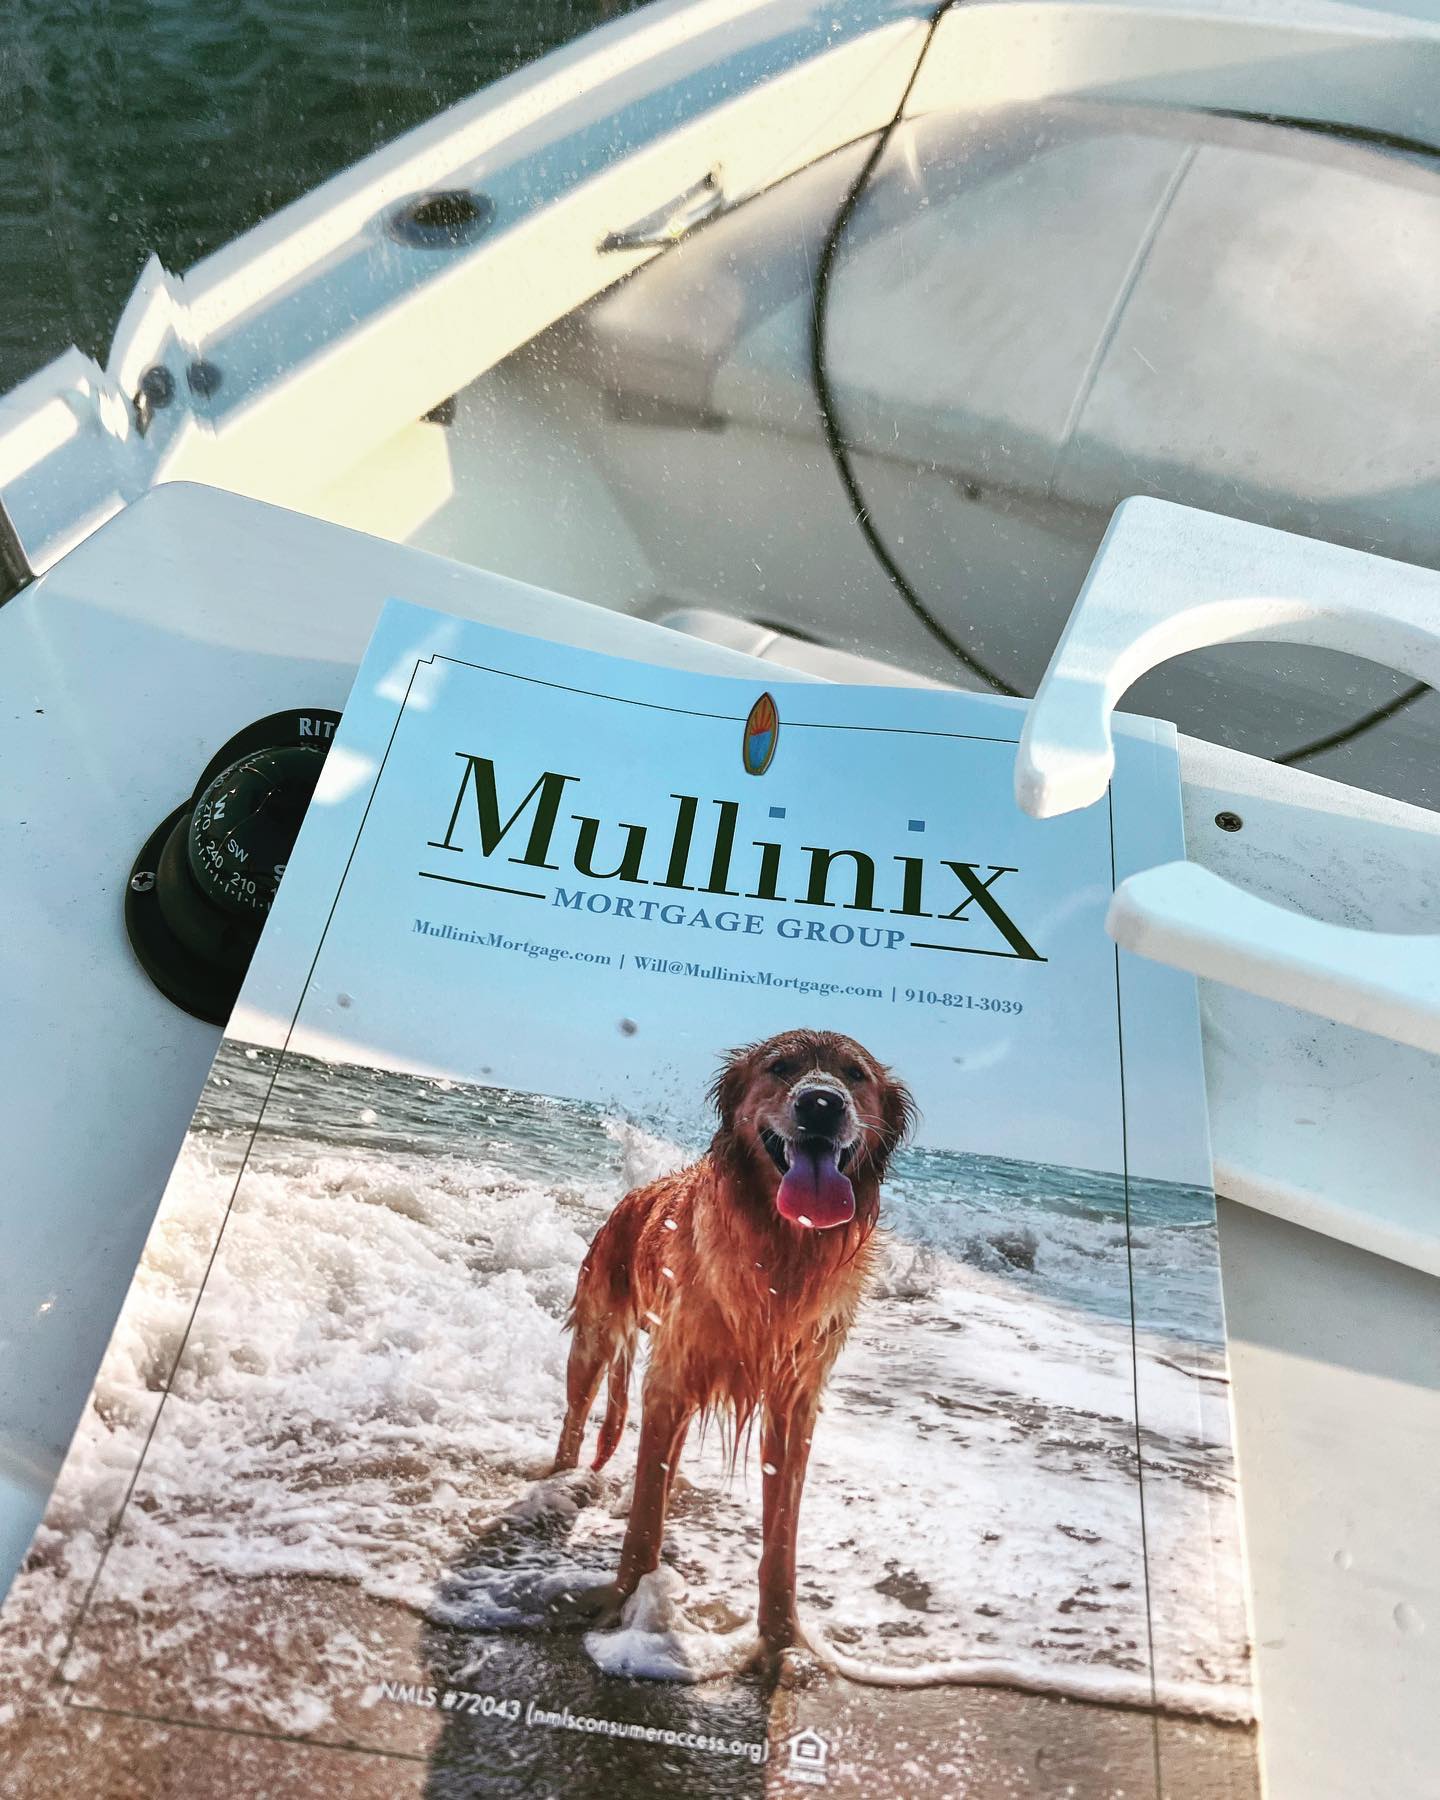 from @mullinixmortgage instagram feed